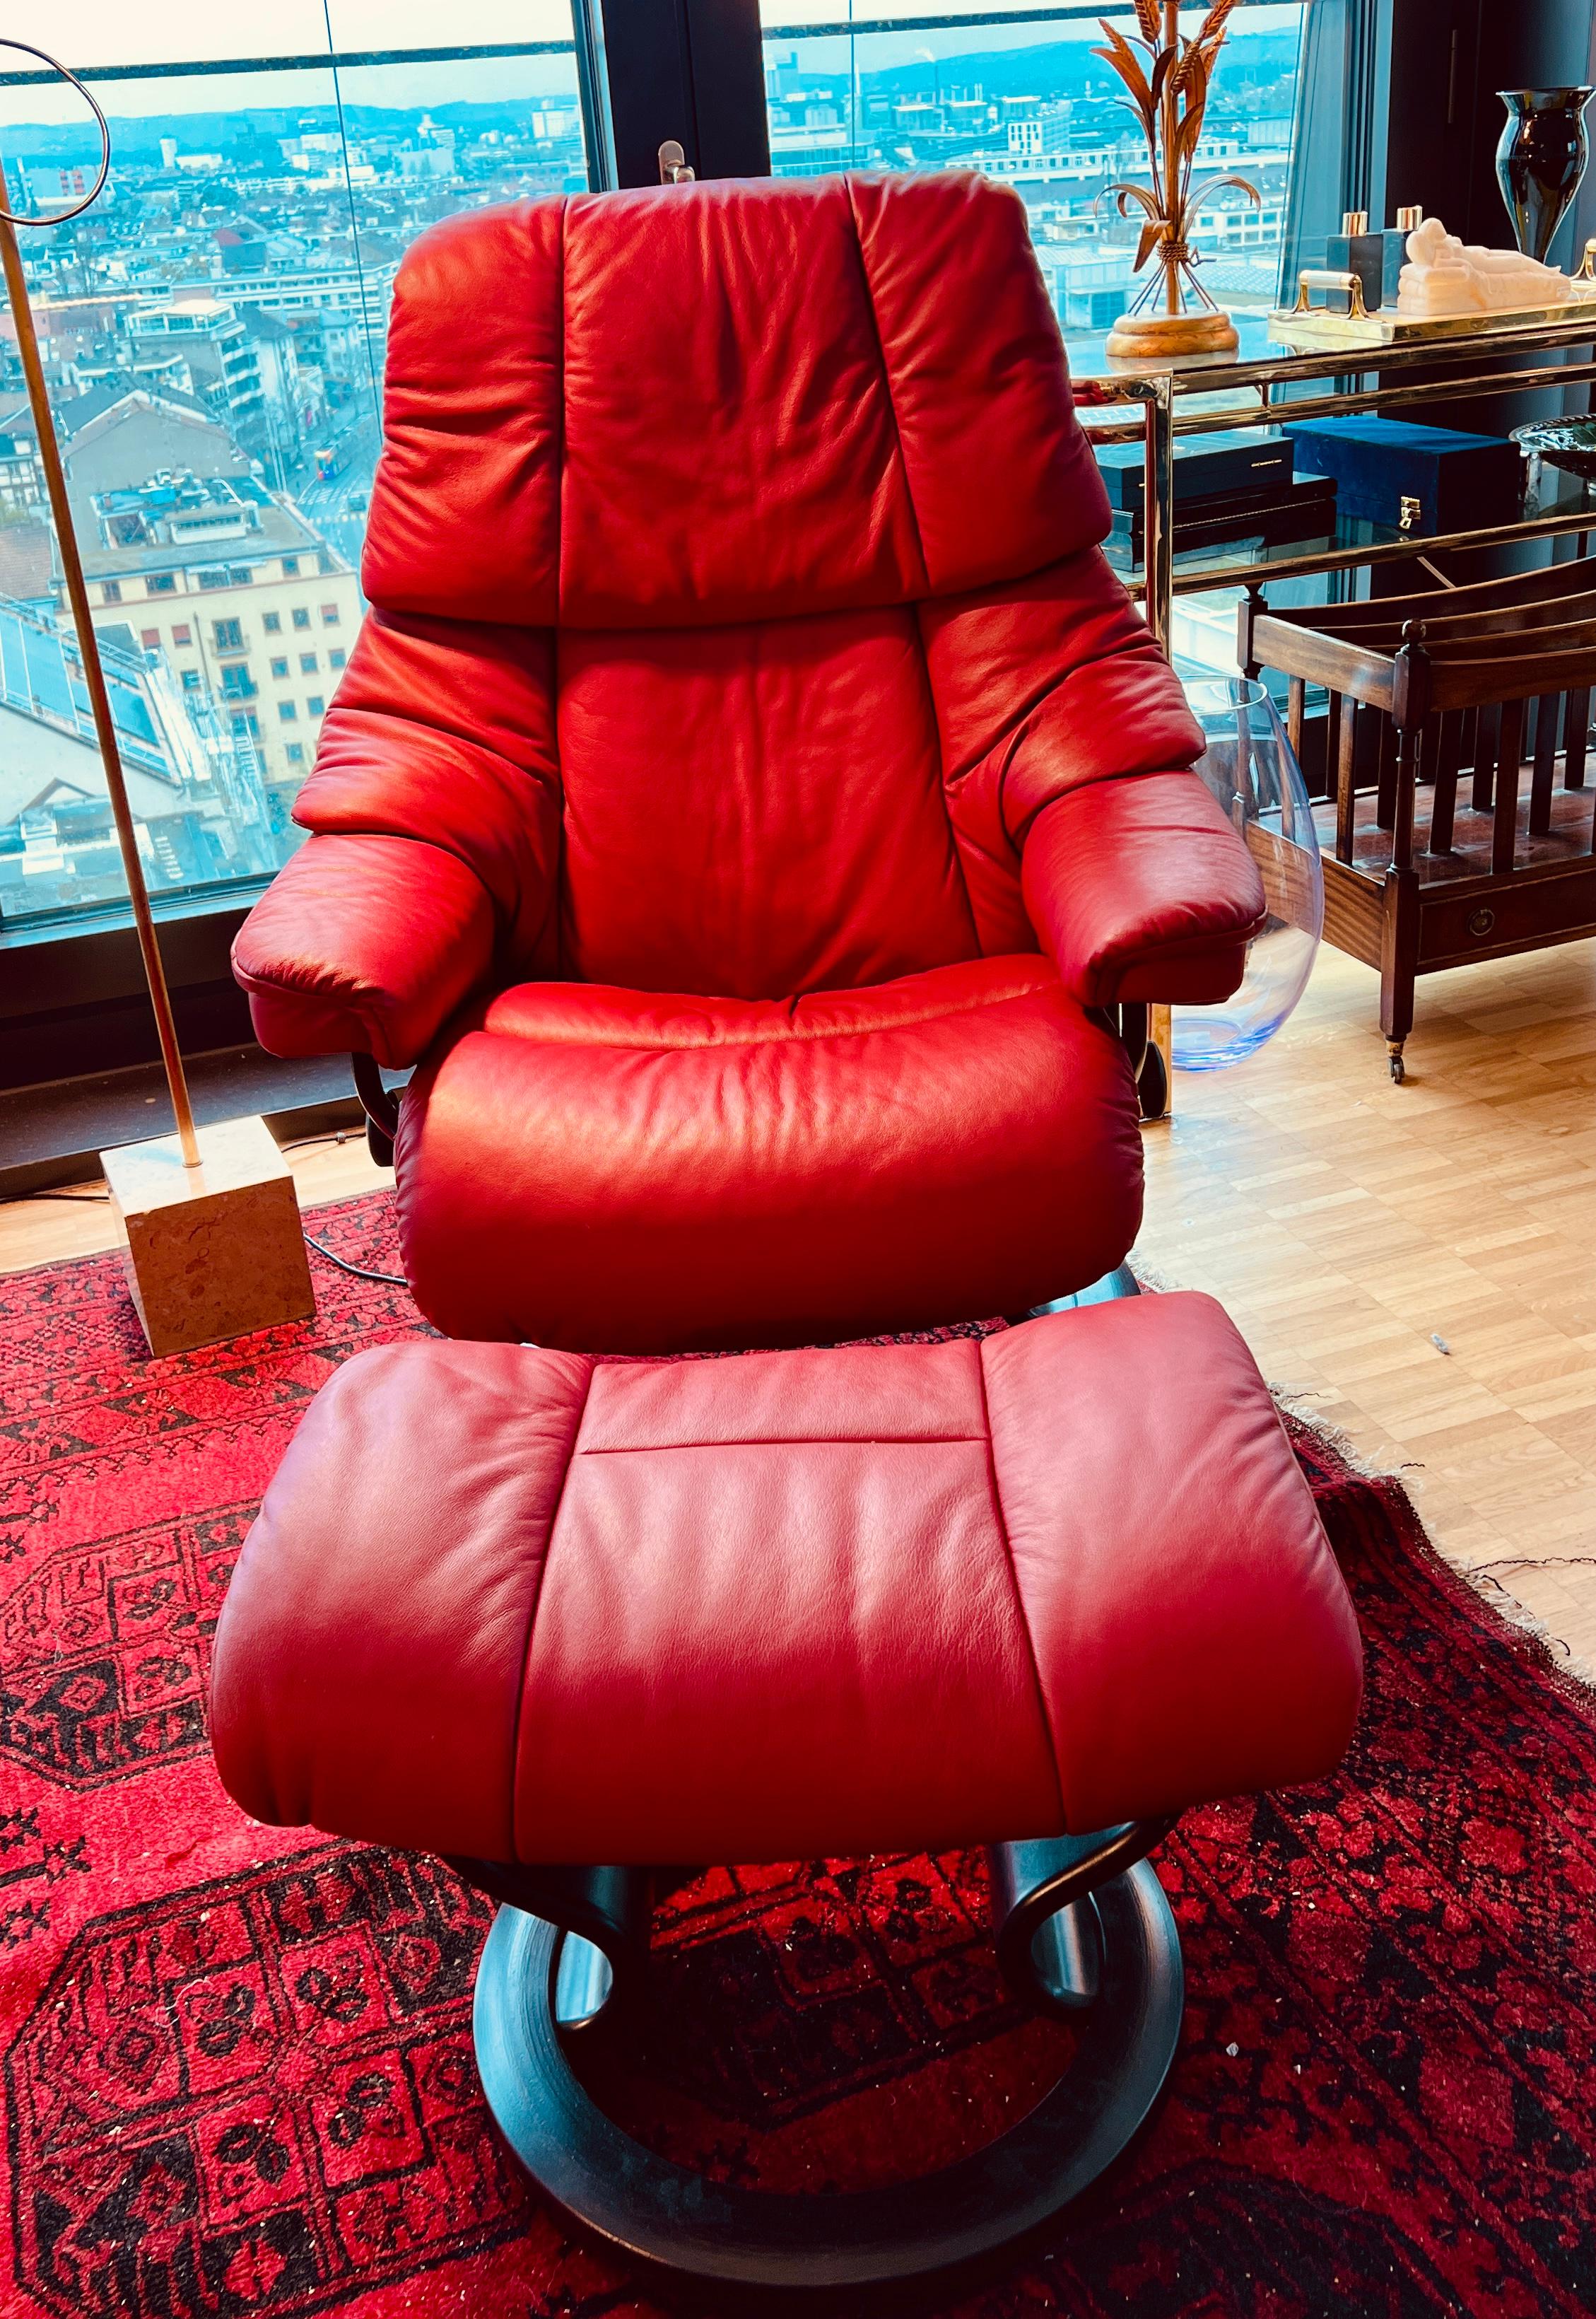 Norwegian Burgundy Leather Stressless Recliner with Ottoman from Ekornes, Norway 1990